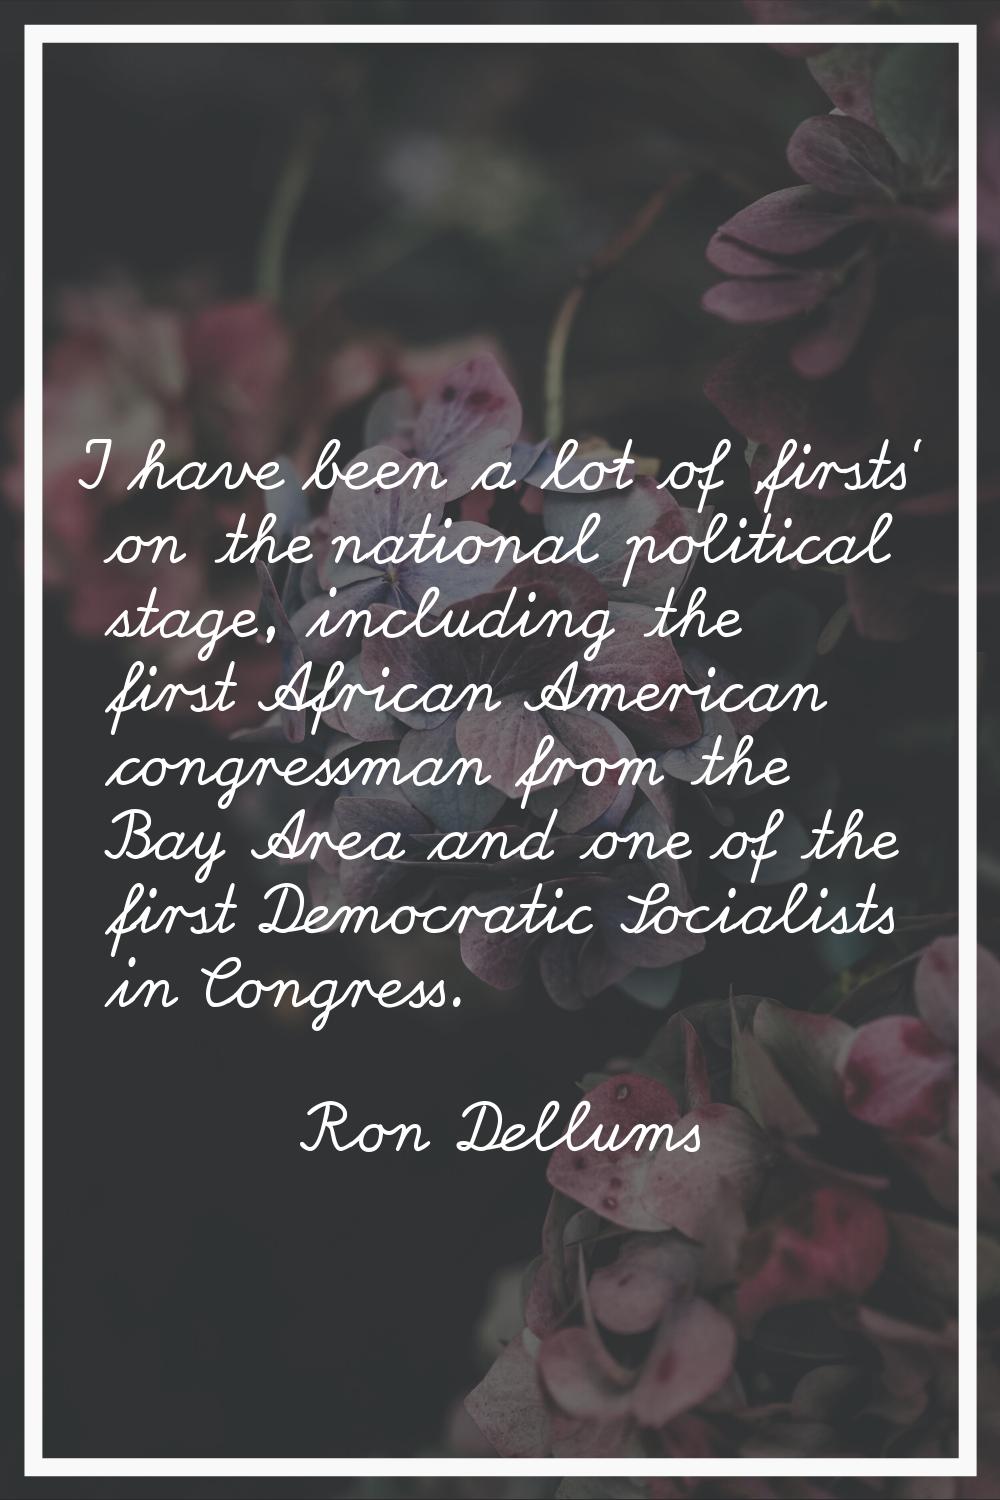 I have been a lot of 'firsts' on the national political stage, including the first African American